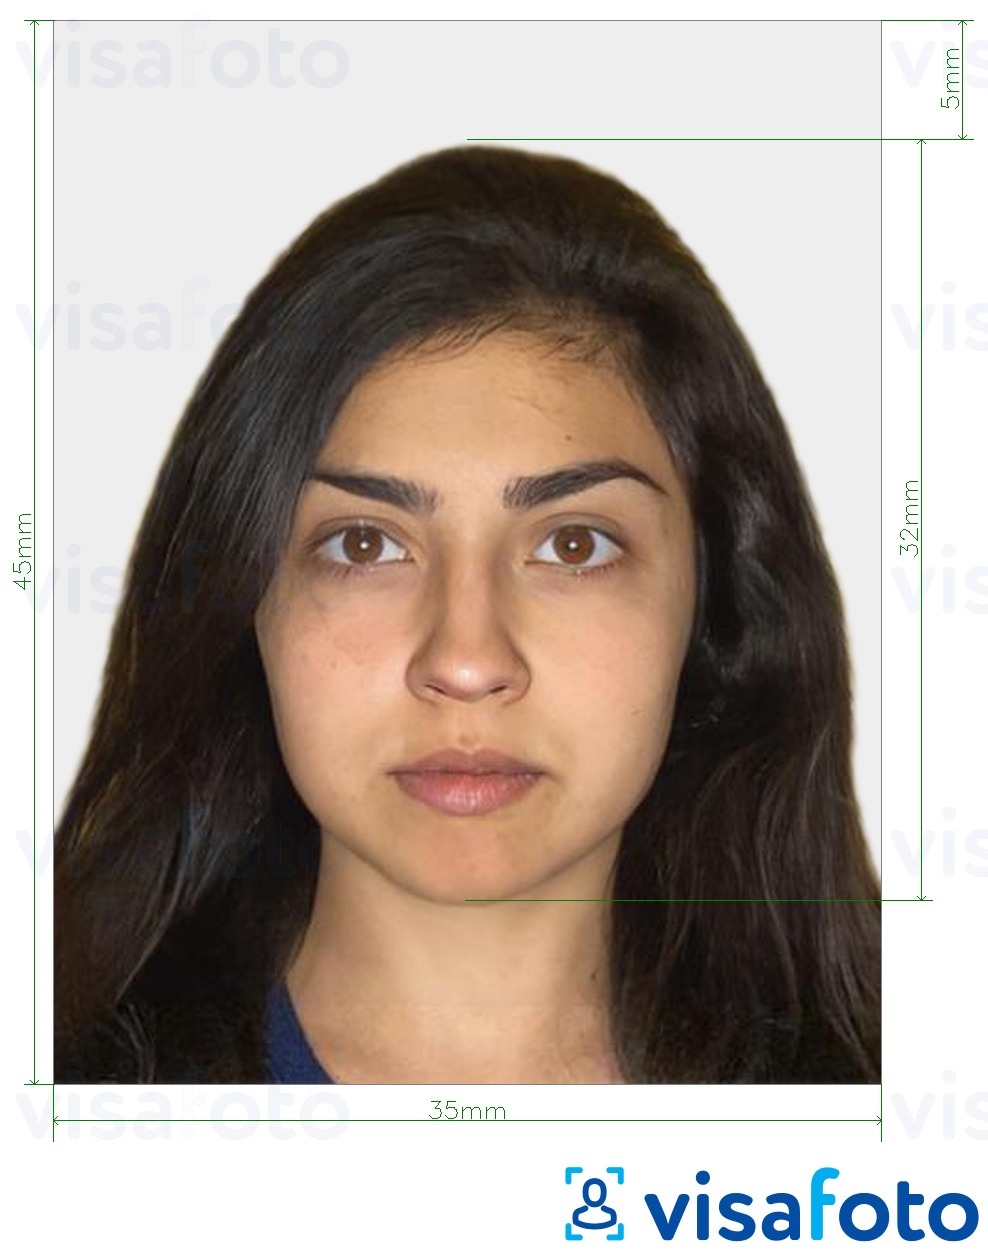 Example of photo for Israel Passport 35x45 mm (3.5x4.5 cm) with exact size specification